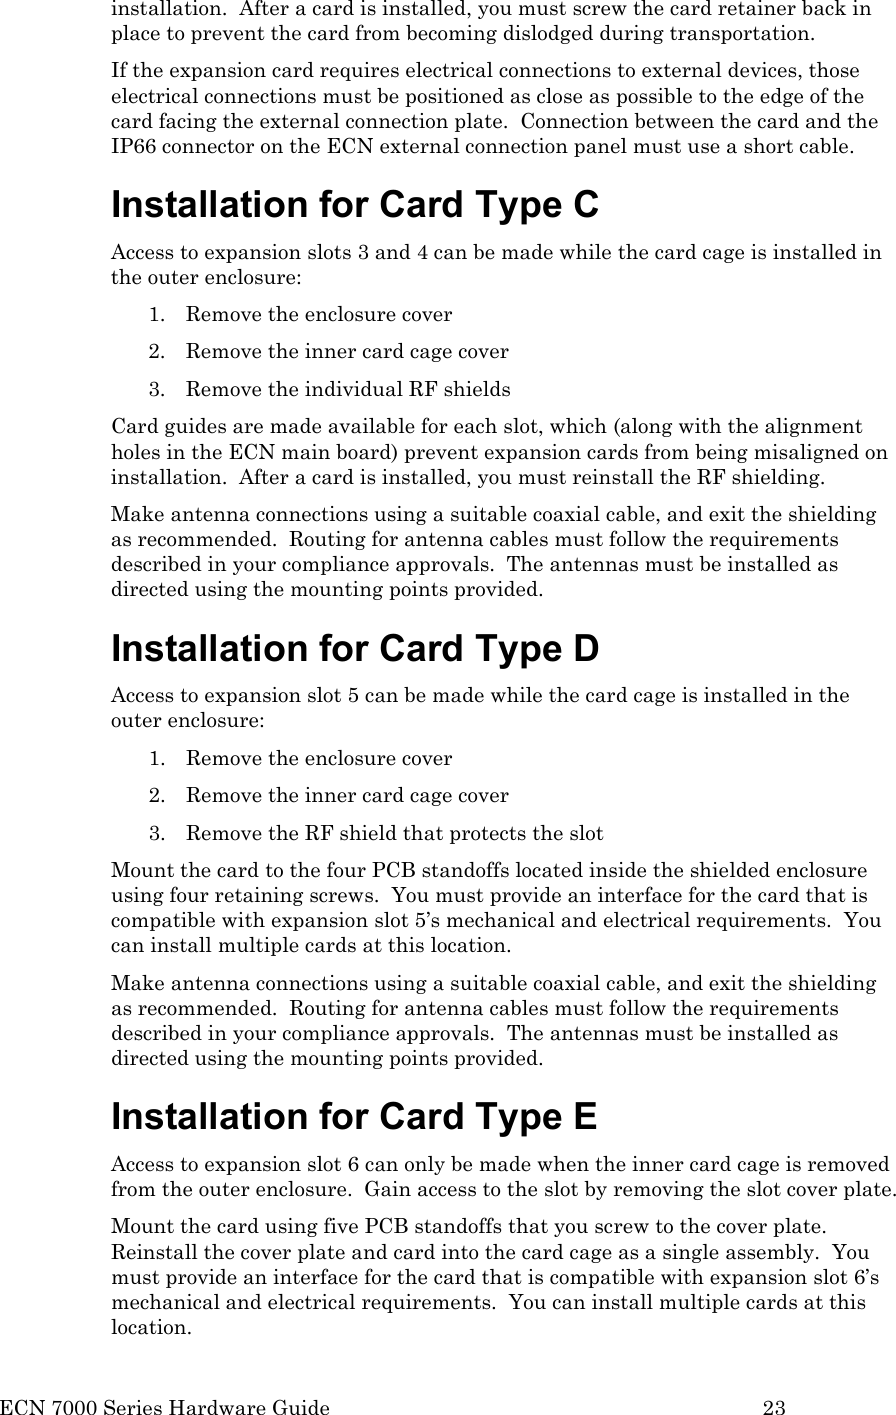  ECN 7000 Series Hardware Guide        23 installation.  After a card is installed, you must screw the card retainer back in place to prevent the card from becoming dislodged during transportation. If the expansion card requires electrical connections to external devices, those electrical connections must be positioned as close as possible to the edge of the card facing the external connection plate.  Connection between the card and the IP66 connector on the ECN external connection panel must use a short cable. Installation for Card Type C  Access to expansion slots 3 and 4 can be made while the card cage is installed in the outer enclosure: 1. Remove the enclosure cover 2. Remove the inner card cage cover 3. Remove the individual RF shields  Card guides are made available for each slot, which (along with the alignment holes in the ECN main board) prevent expansion cards from being misaligned on installation.  After a card is installed, you must reinstall the RF shielding.  Make antenna connections using a suitable coaxial cable, and exit the shielding as recommended.  Routing for antenna cables must follow the requirements described in your compliance approvals.  The antennas must be installed as directed using the mounting points provided.  Installation for Card Type D Access to expansion slot 5 can be made while the card cage is installed in the outer enclosure: 1. Remove the enclosure cover 2. Remove the inner card cage cover 3. Remove the RF shield that protects the slot Mount the card to the four PCB standoffs located inside the shielded enclosure using four retaining screws.  You must provide an interface for the card that is compatible with expansion slot 5’s mechanical and electrical requirements.  You can install multiple cards at this location.  Make antenna connections using a suitable coaxial cable, and exit the shielding as recommended.  Routing for antenna cables must follow the requirements described in your compliance approvals.  The antennas must be installed as directed using the mounting points provided.  Installation for Card Type E Access to expansion slot 6 can only be made when the inner card cage is removed from the outer enclosure.  Gain access to the slot by removing the slot cover plate. Mount the card using five PCB standoffs that you screw to the cover plate.  Reinstall the cover plate and card into the card cage as a single assembly.  You must provide an interface for the card that is compatible with expansion slot 6’s mechanical and electrical requirements.  You can install multiple cards at this location.  